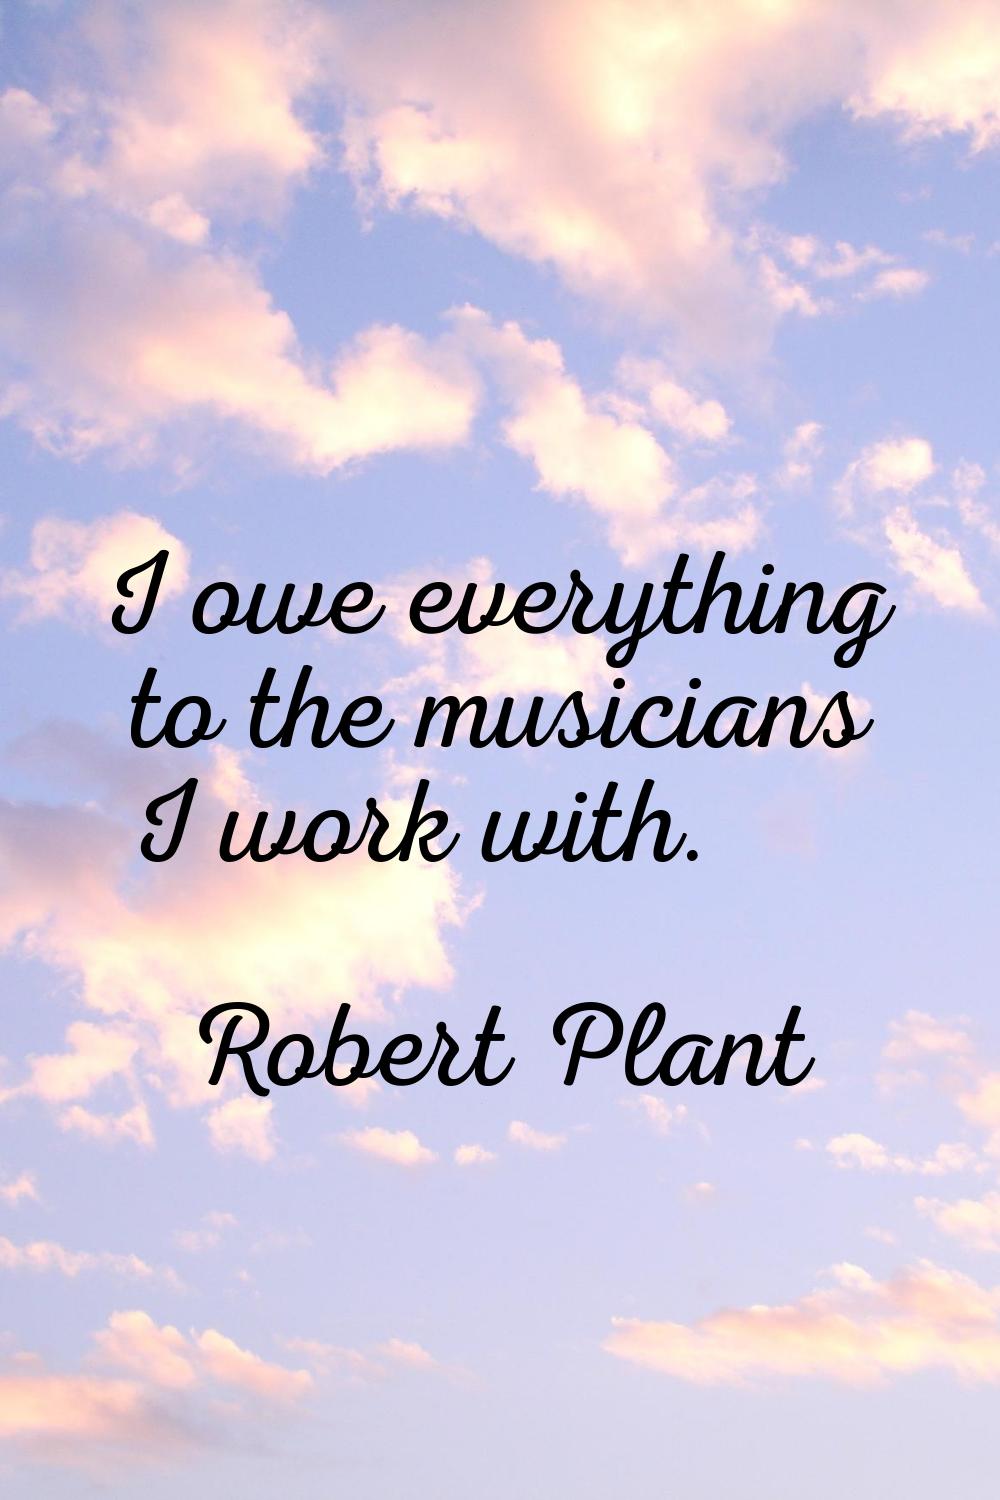 I owe everything to the musicians I work with.